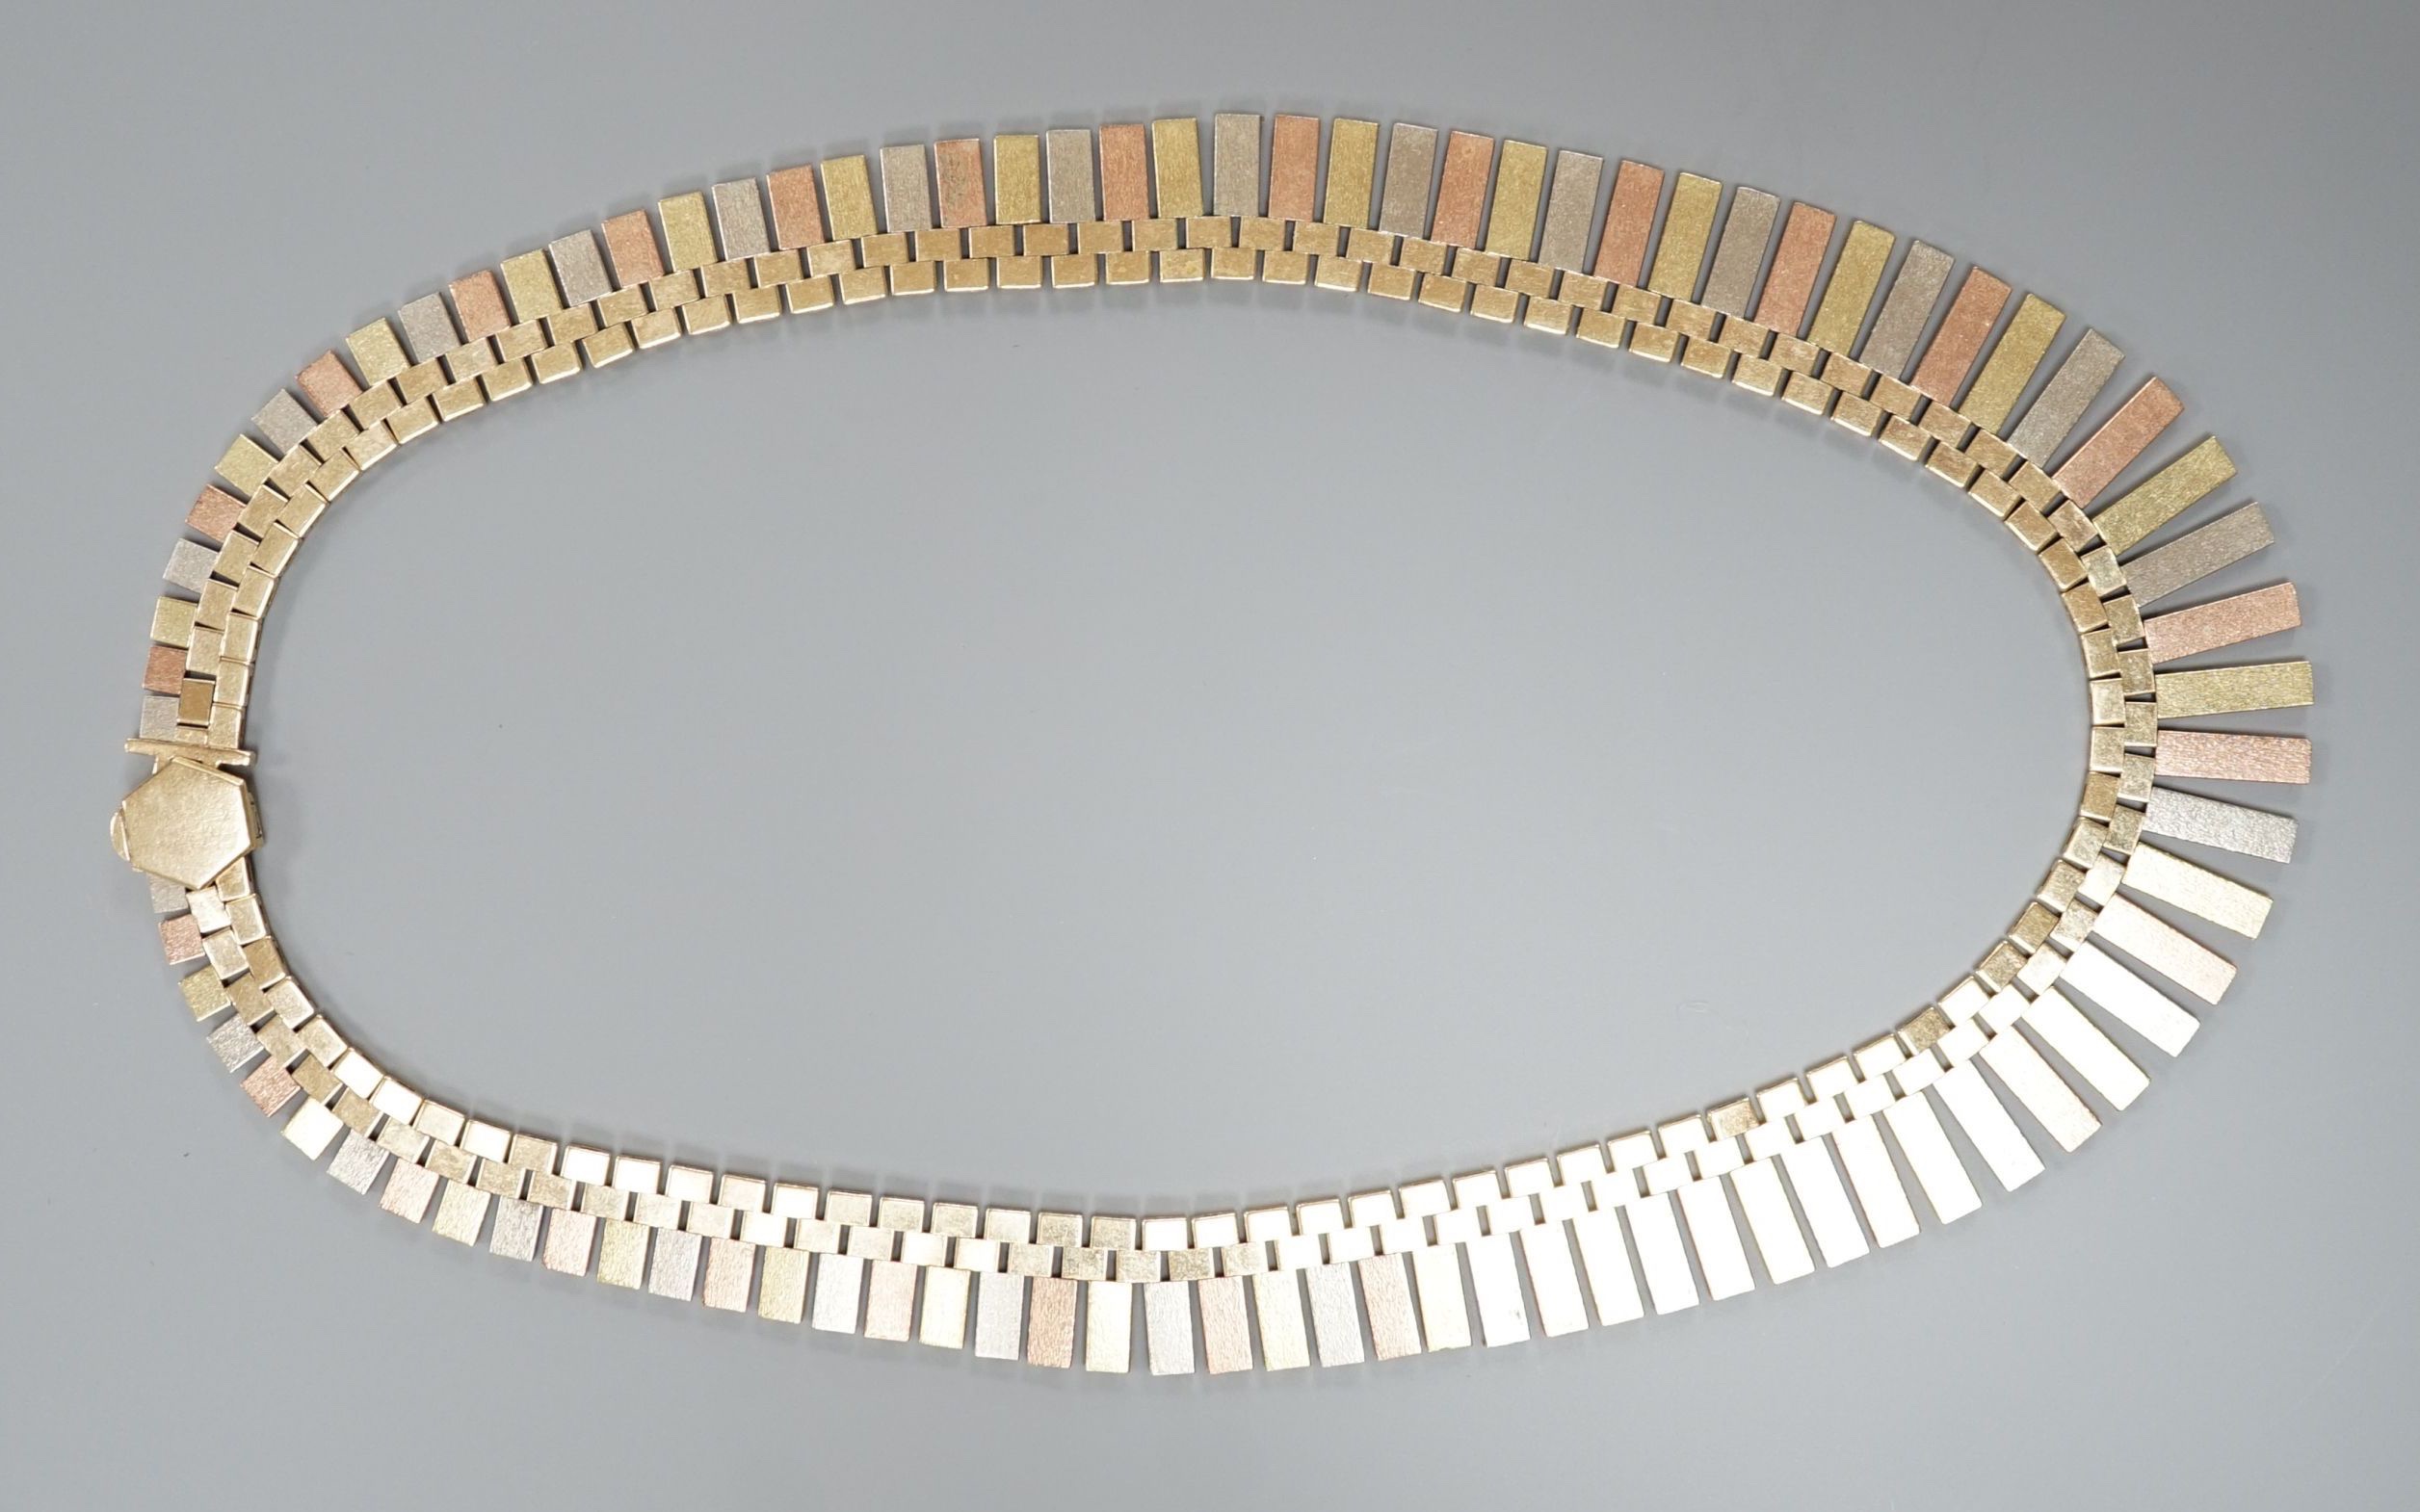 A modern three colour 9ct gold fringe necklace, 40cm, 46.7 grams.